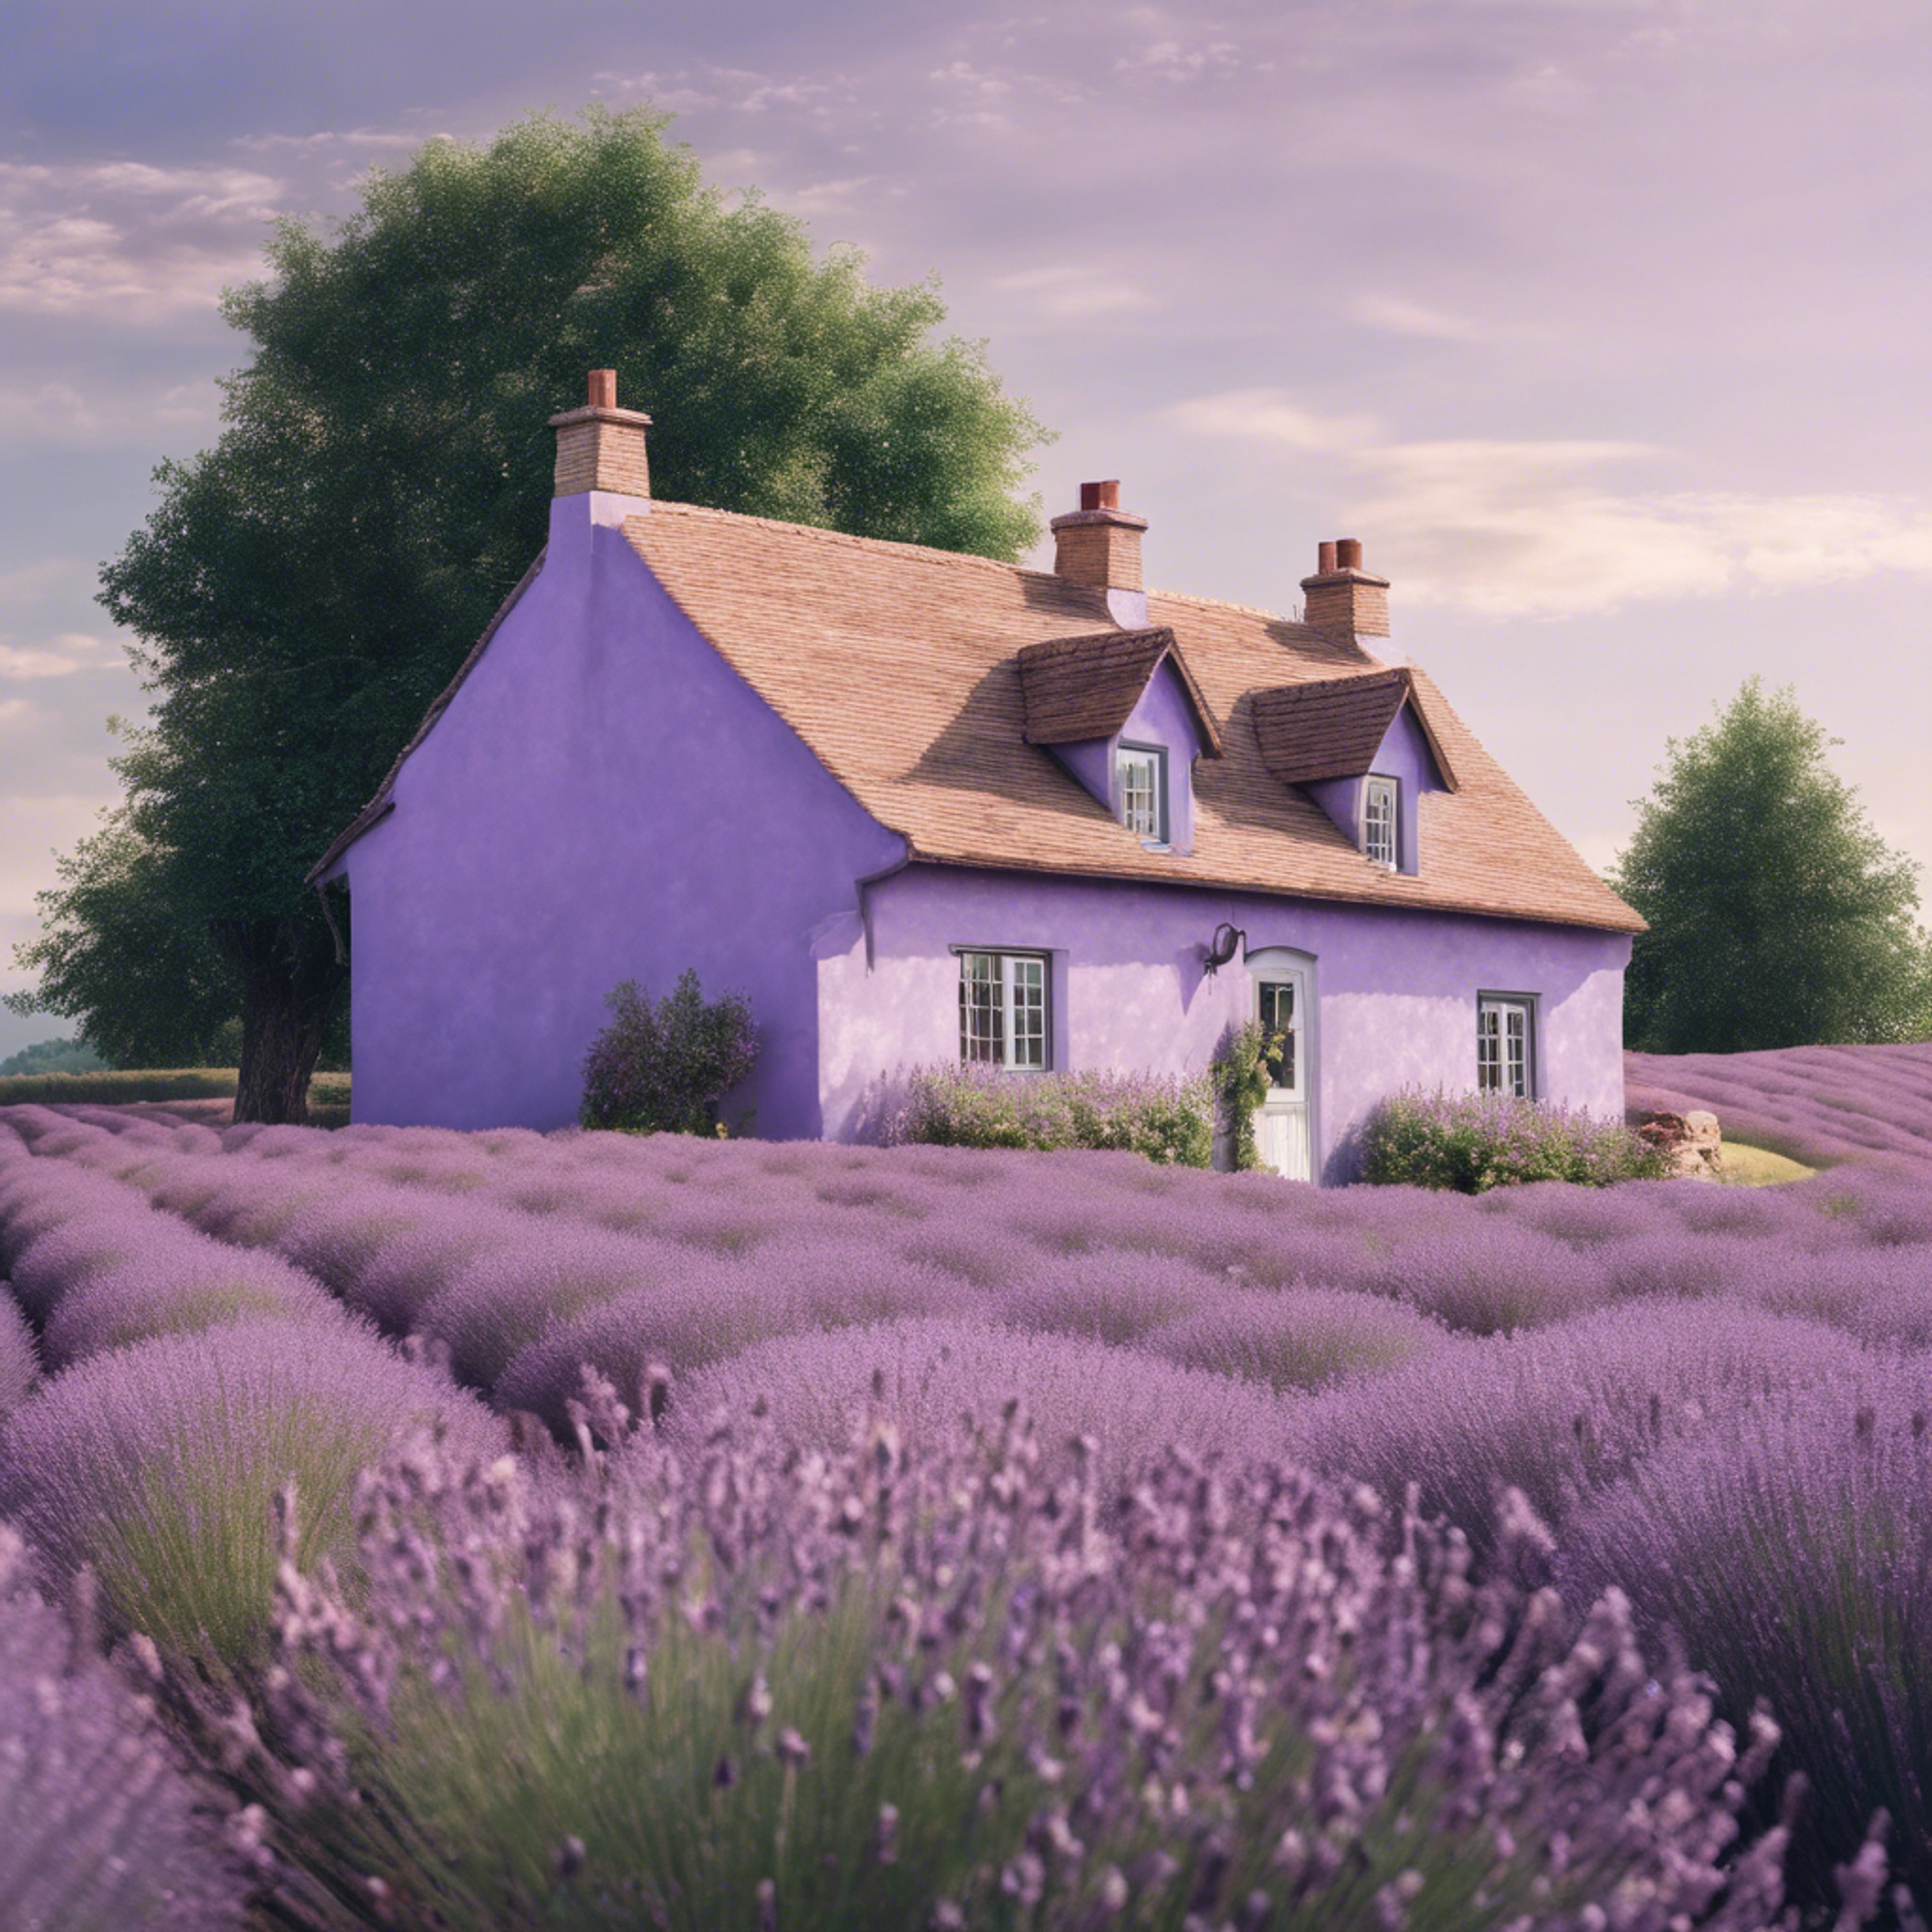 A quaint pastel purple cottage in the countryside surrounded by lavender fields. ورق الجدران[9ff1532238764d01813b]